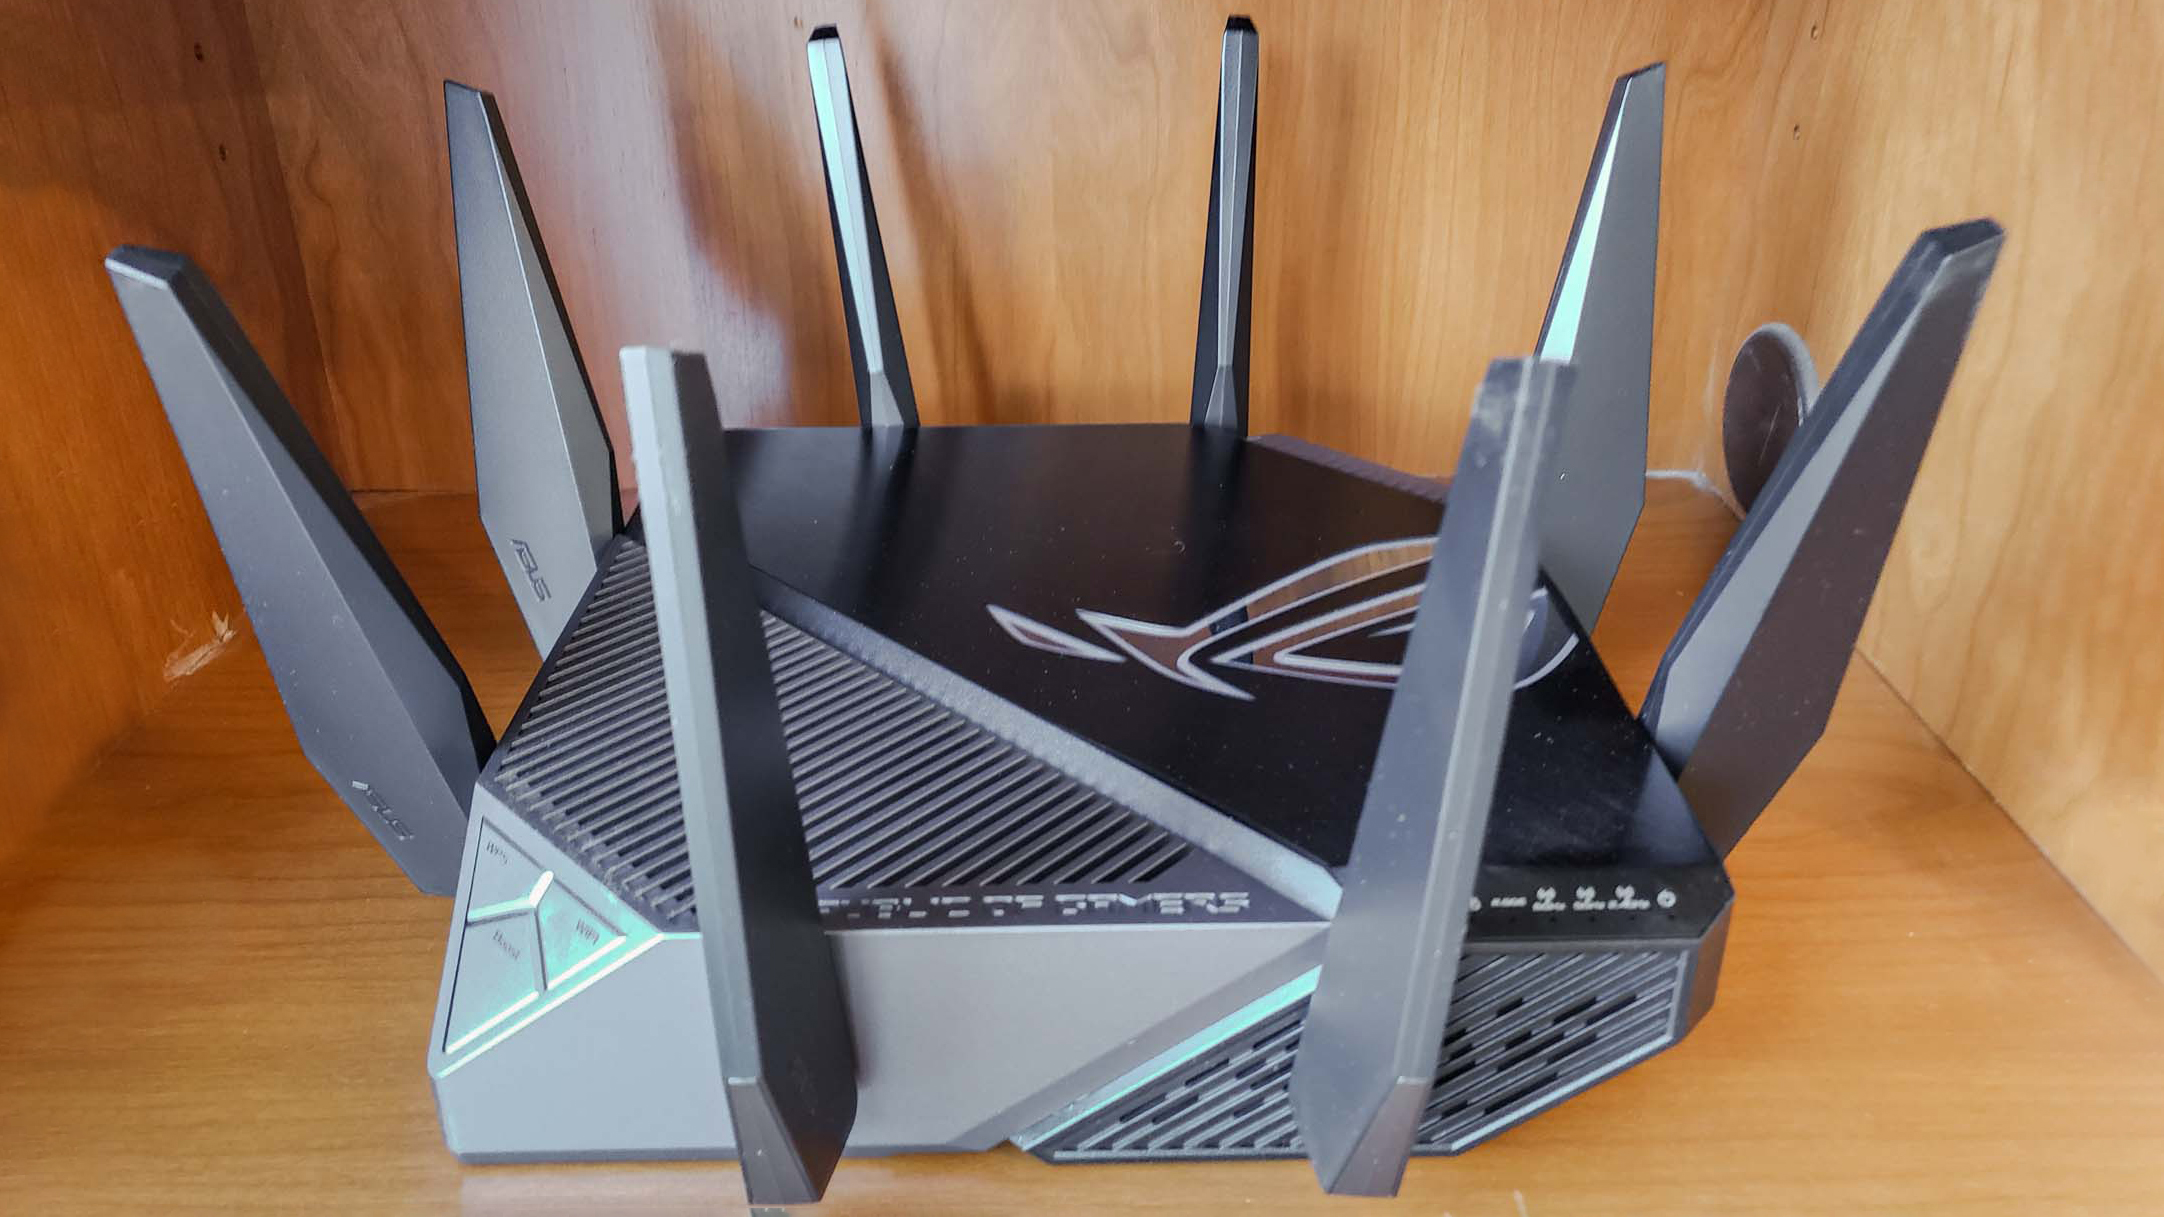 Asus GT-AXE11000 router on shelf